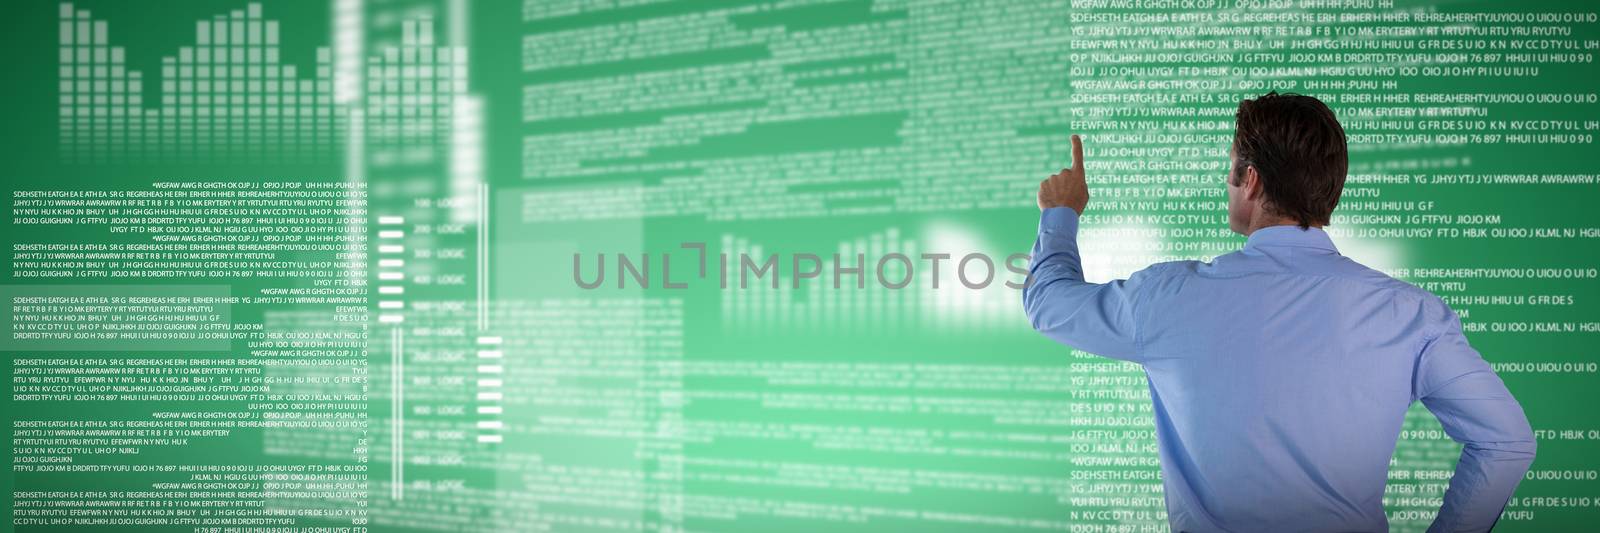 Rear view of businessman with hand on hip touching invisible interface against abstract green background